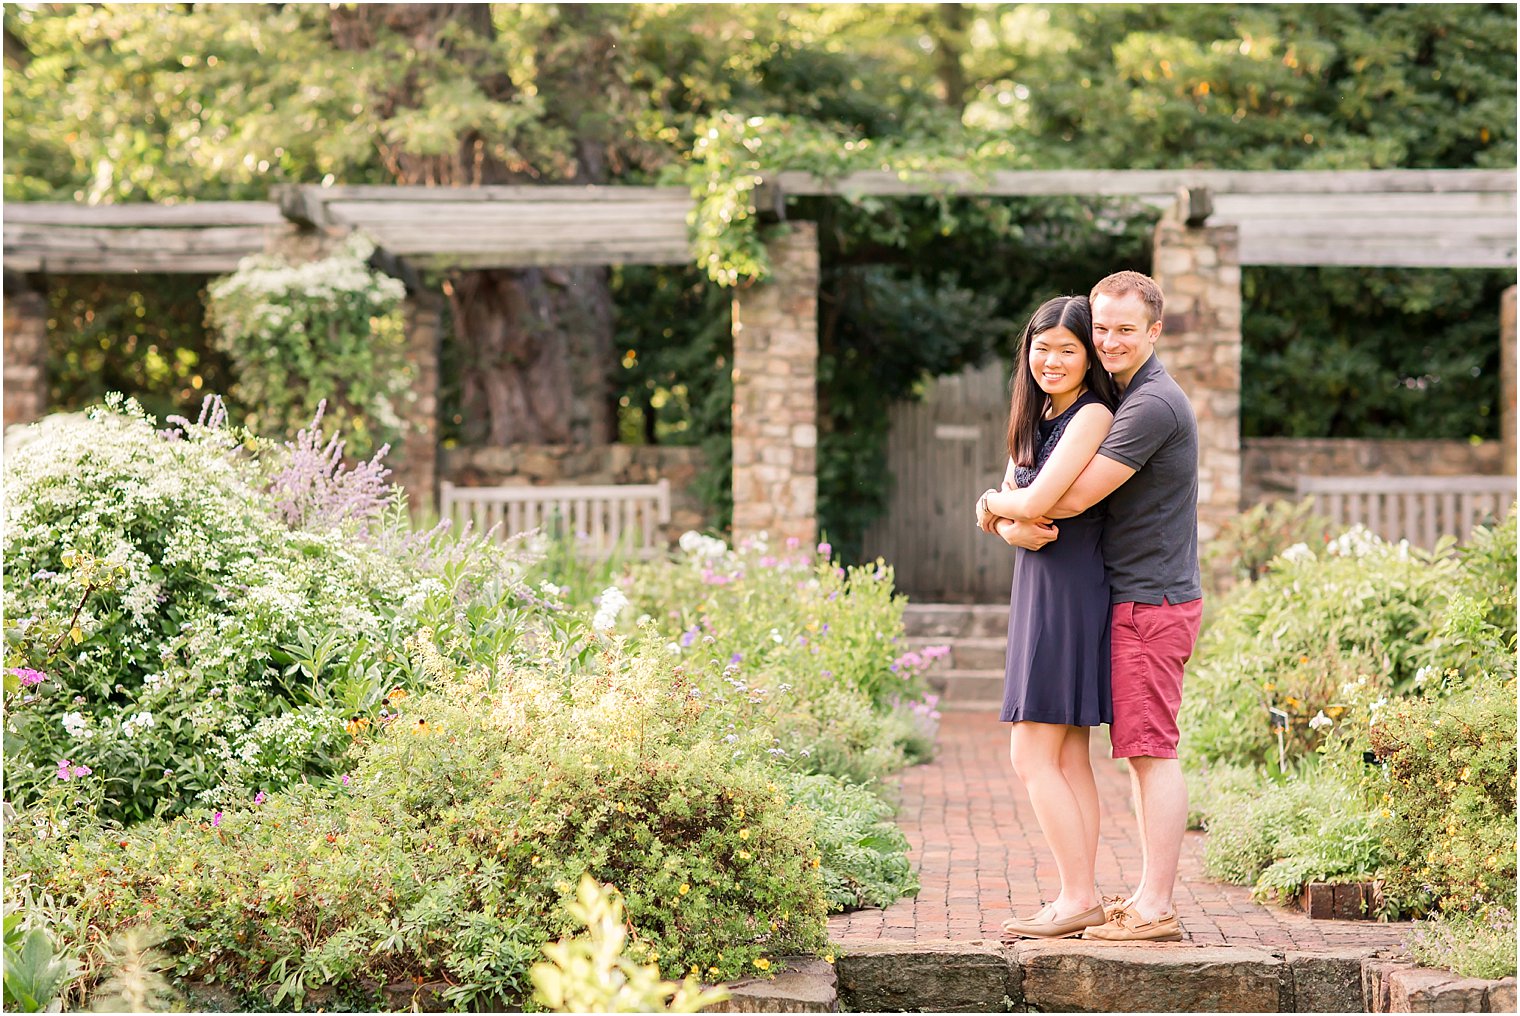 Where to take engagement photos in NJ